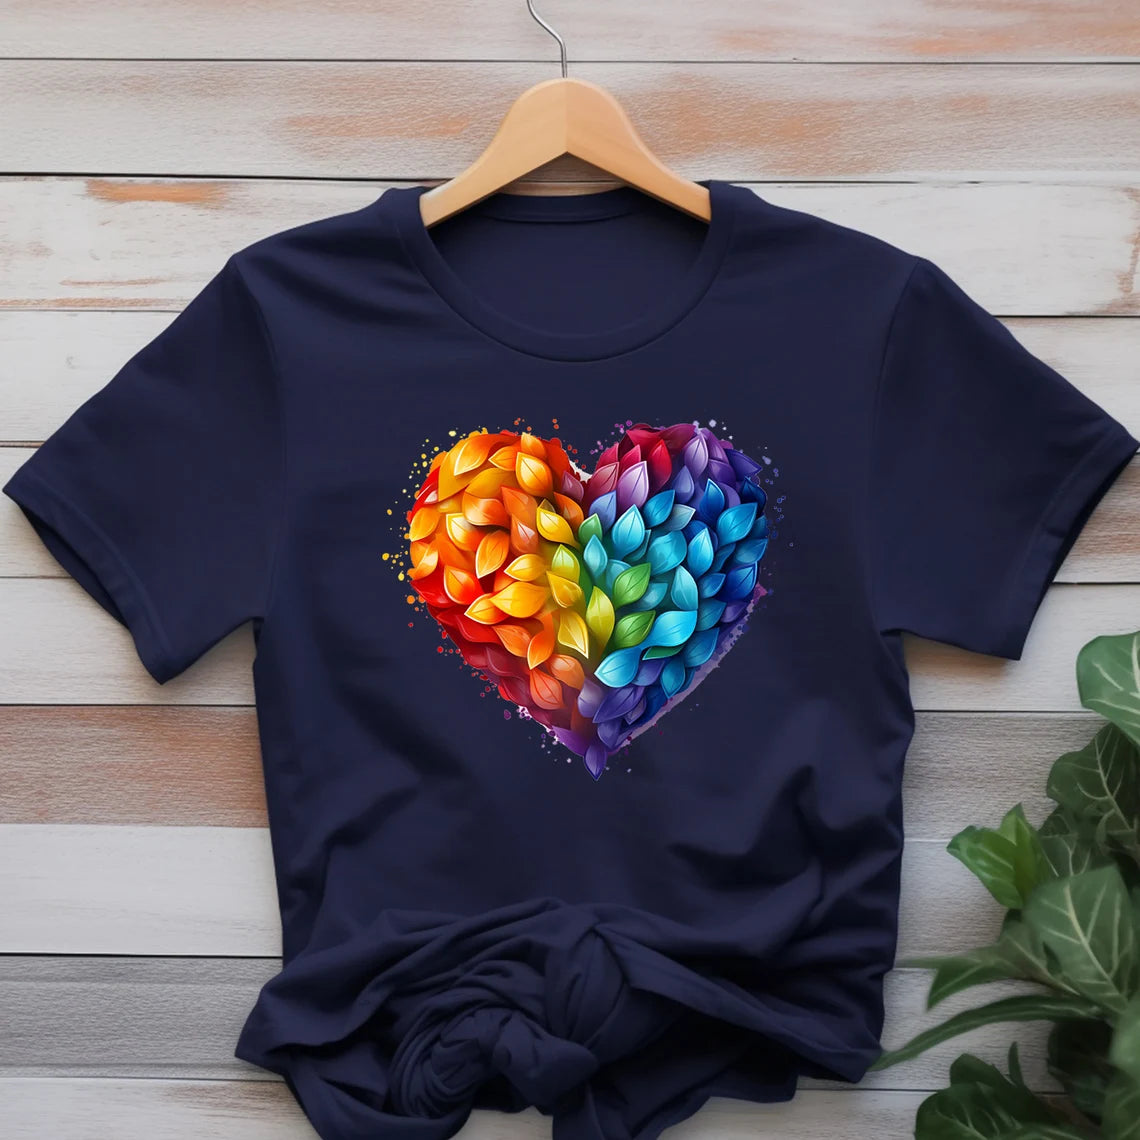 Water Color Painted Heart, Pretty Rainbow Valentine, Colorful Heart, LGBT Shirt, Pride Shirt, Trans Pride,Gay Pride Awareness